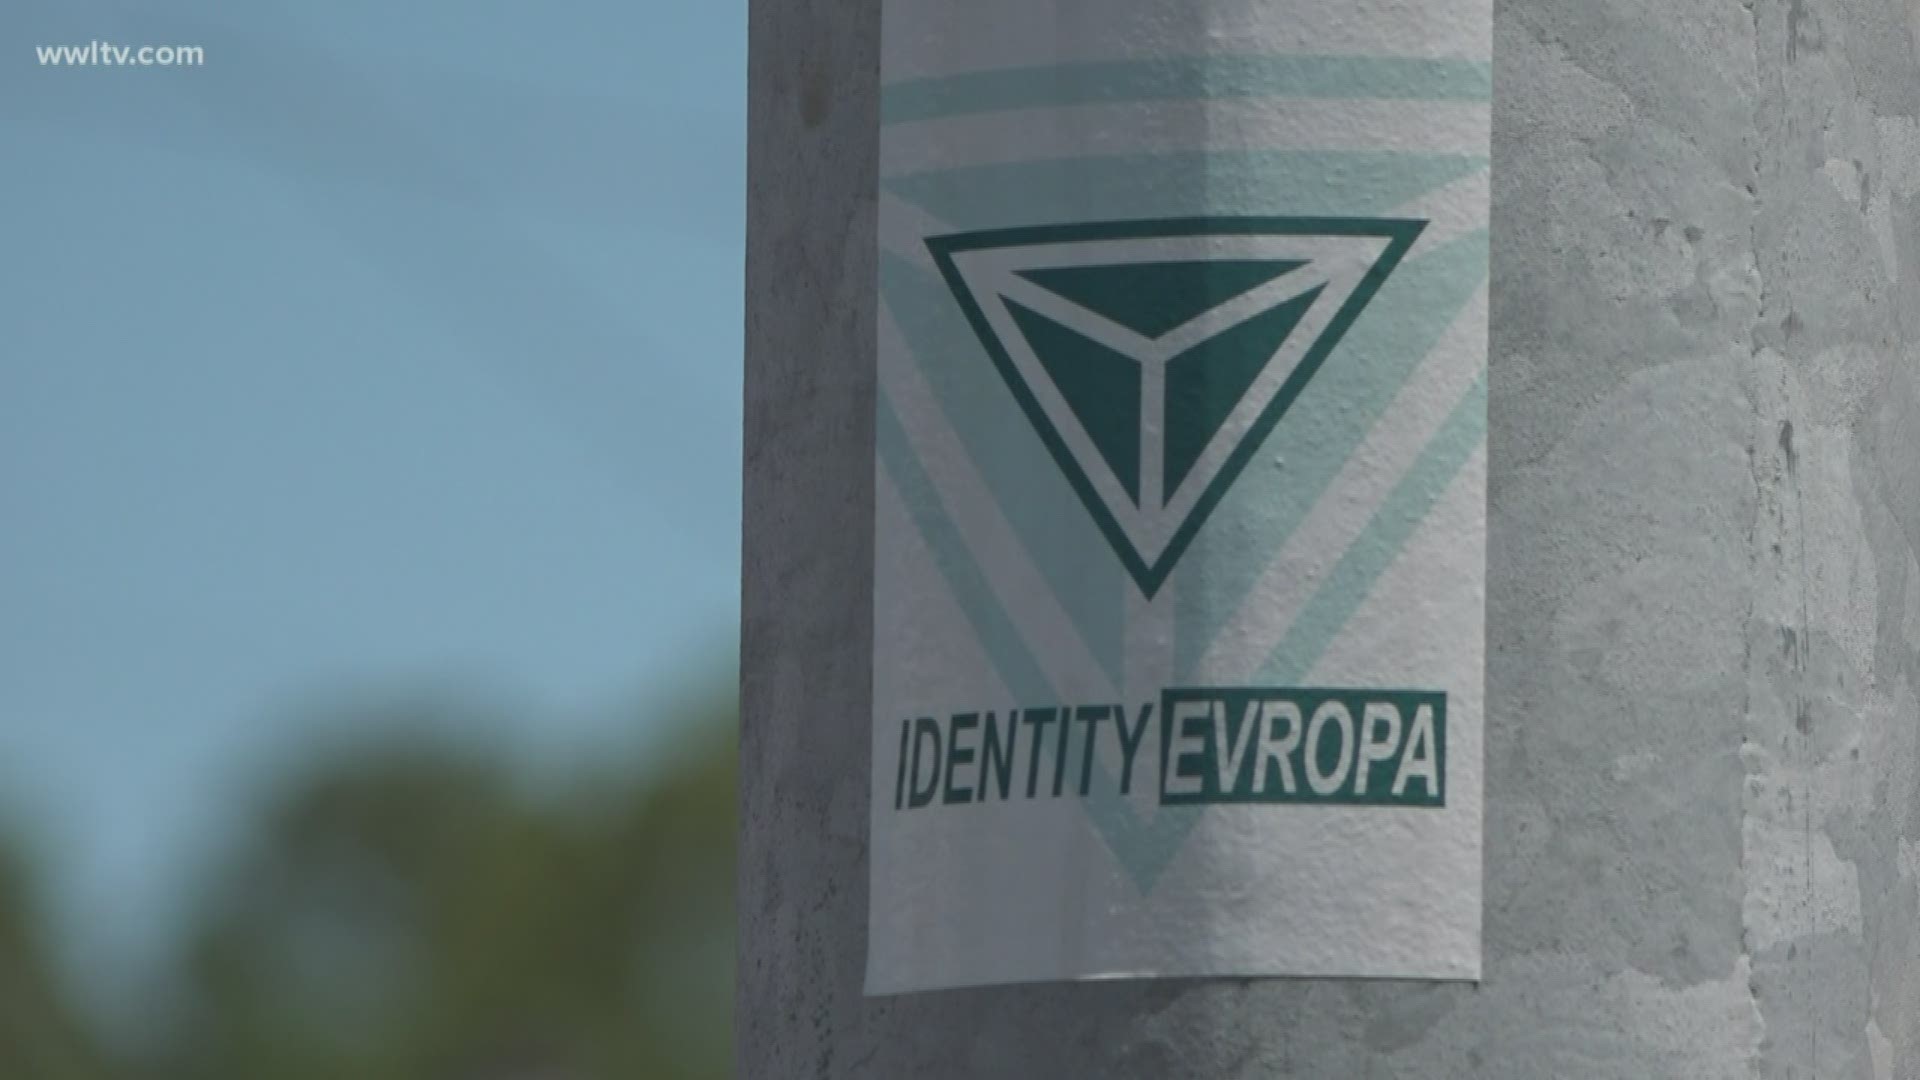 There's confusion in Metairie as to why stickers, appearing to name a white supremacy and neo-Nazi group, are popping up. It's unclear who put them up and how long they've been out there, but people say there's no place for them.